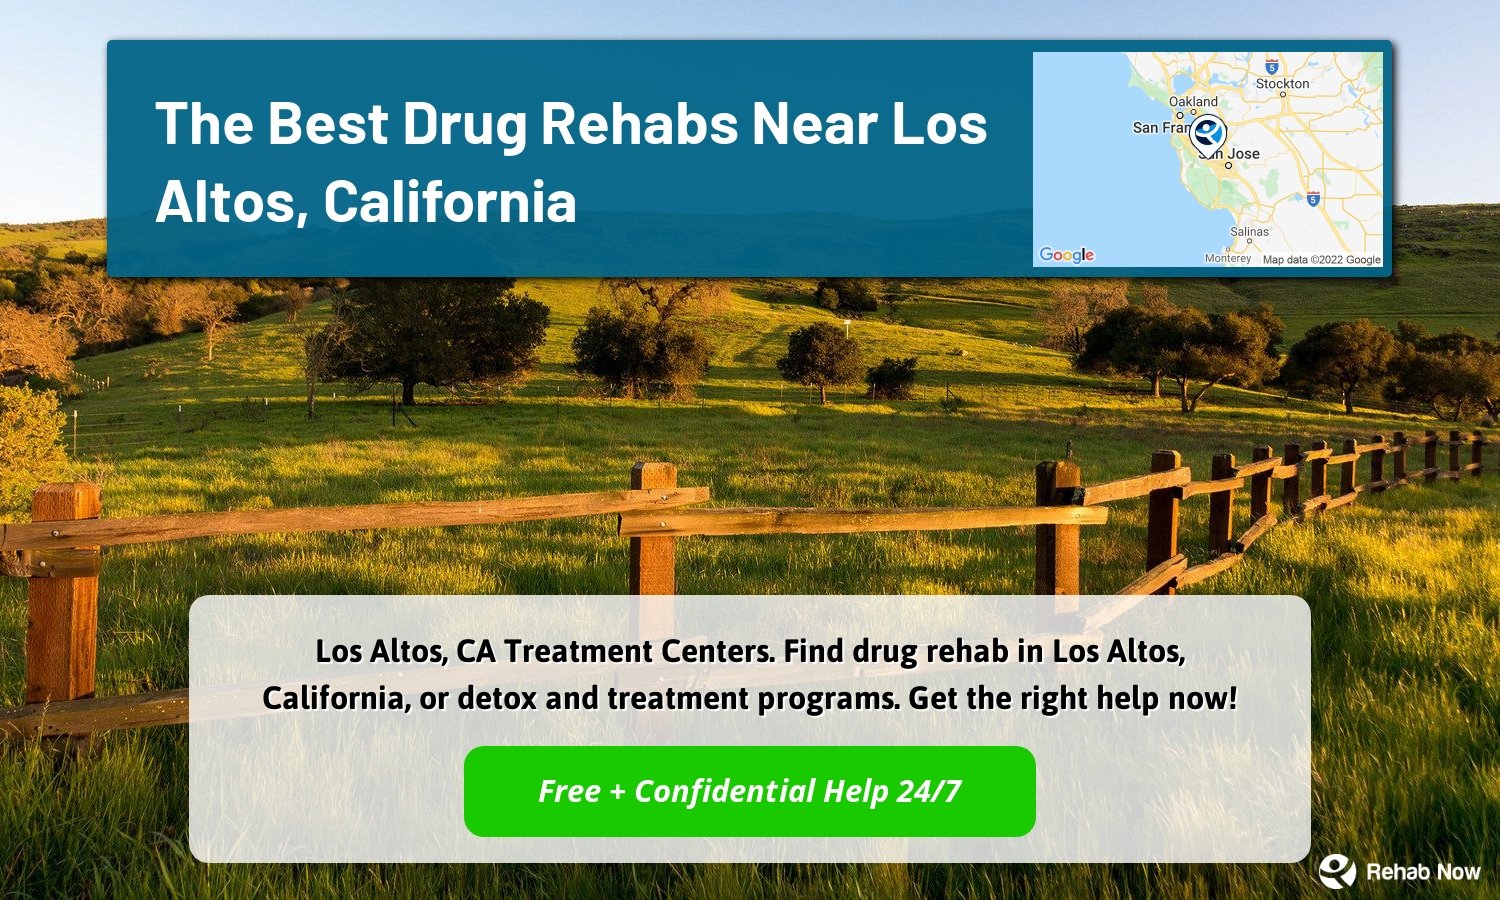 Los Altos, CA Treatment Centers. Find drug rehab in Los Altos, California, or detox and treatment programs. Get the right help now!